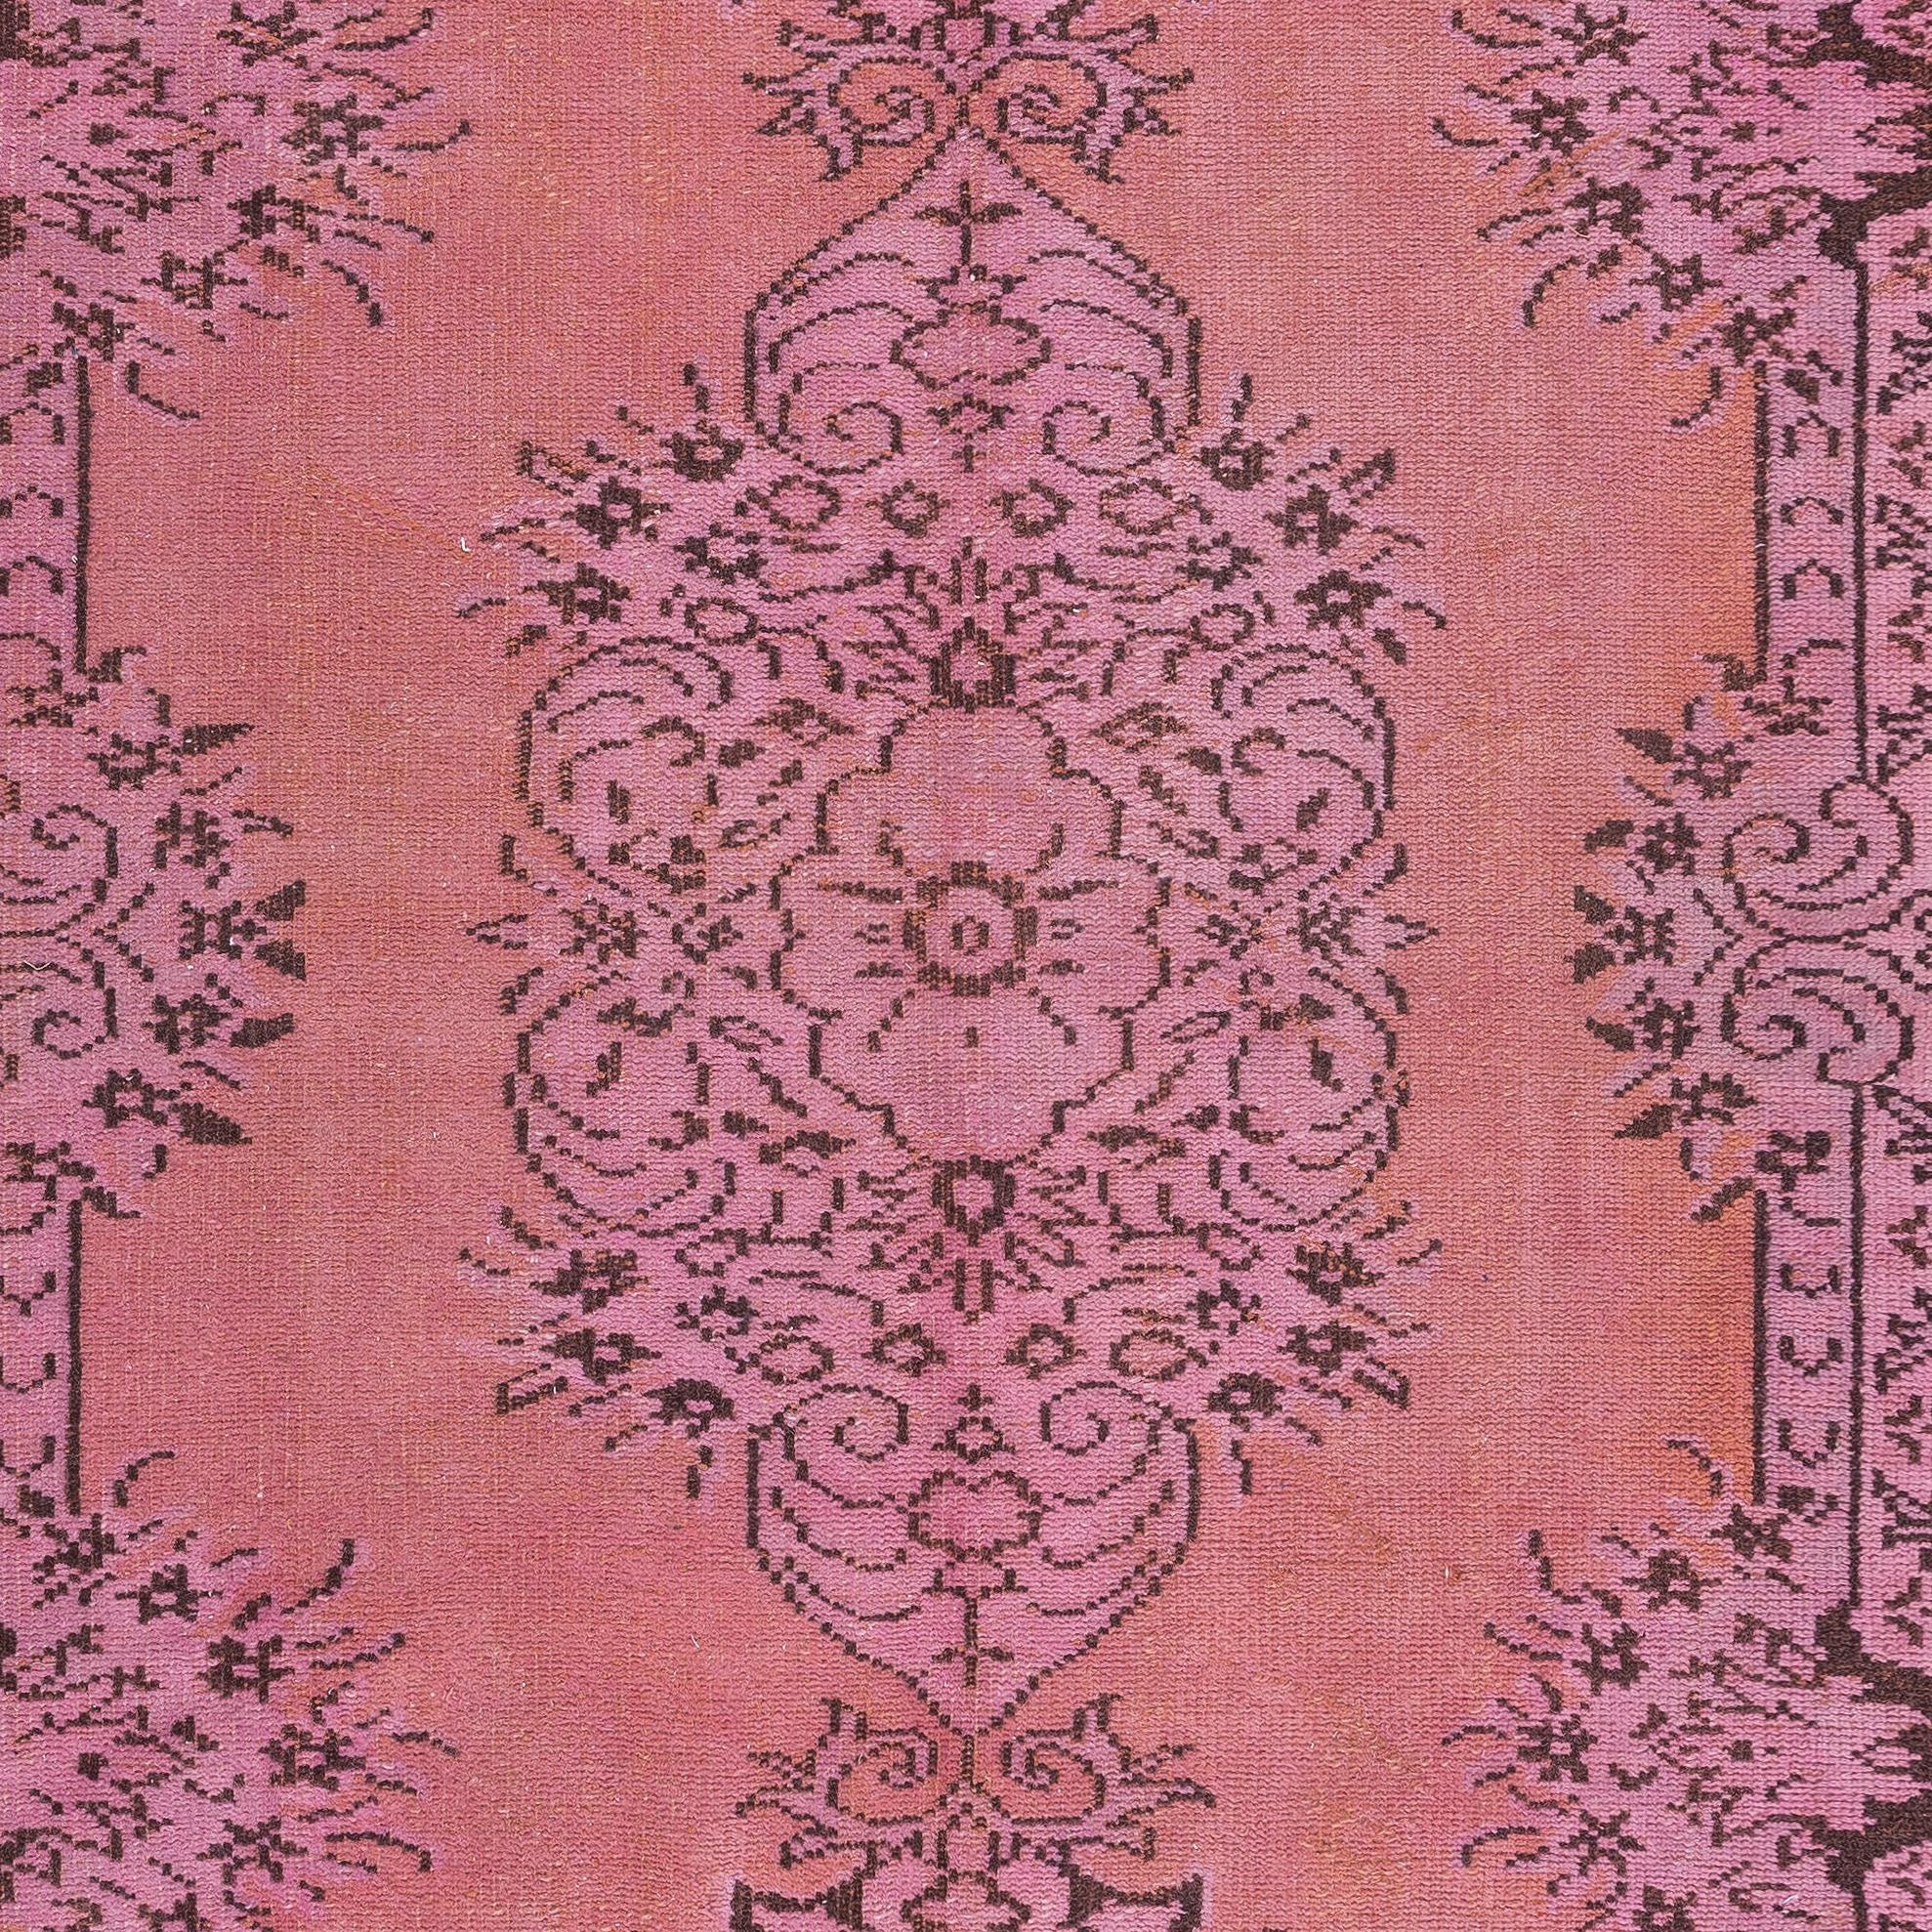 Hand-Knotted 5.6x9 Ft Pink Living Room Decor Rug. Contemporary Handmade Turkish Wool Carpet For Sale